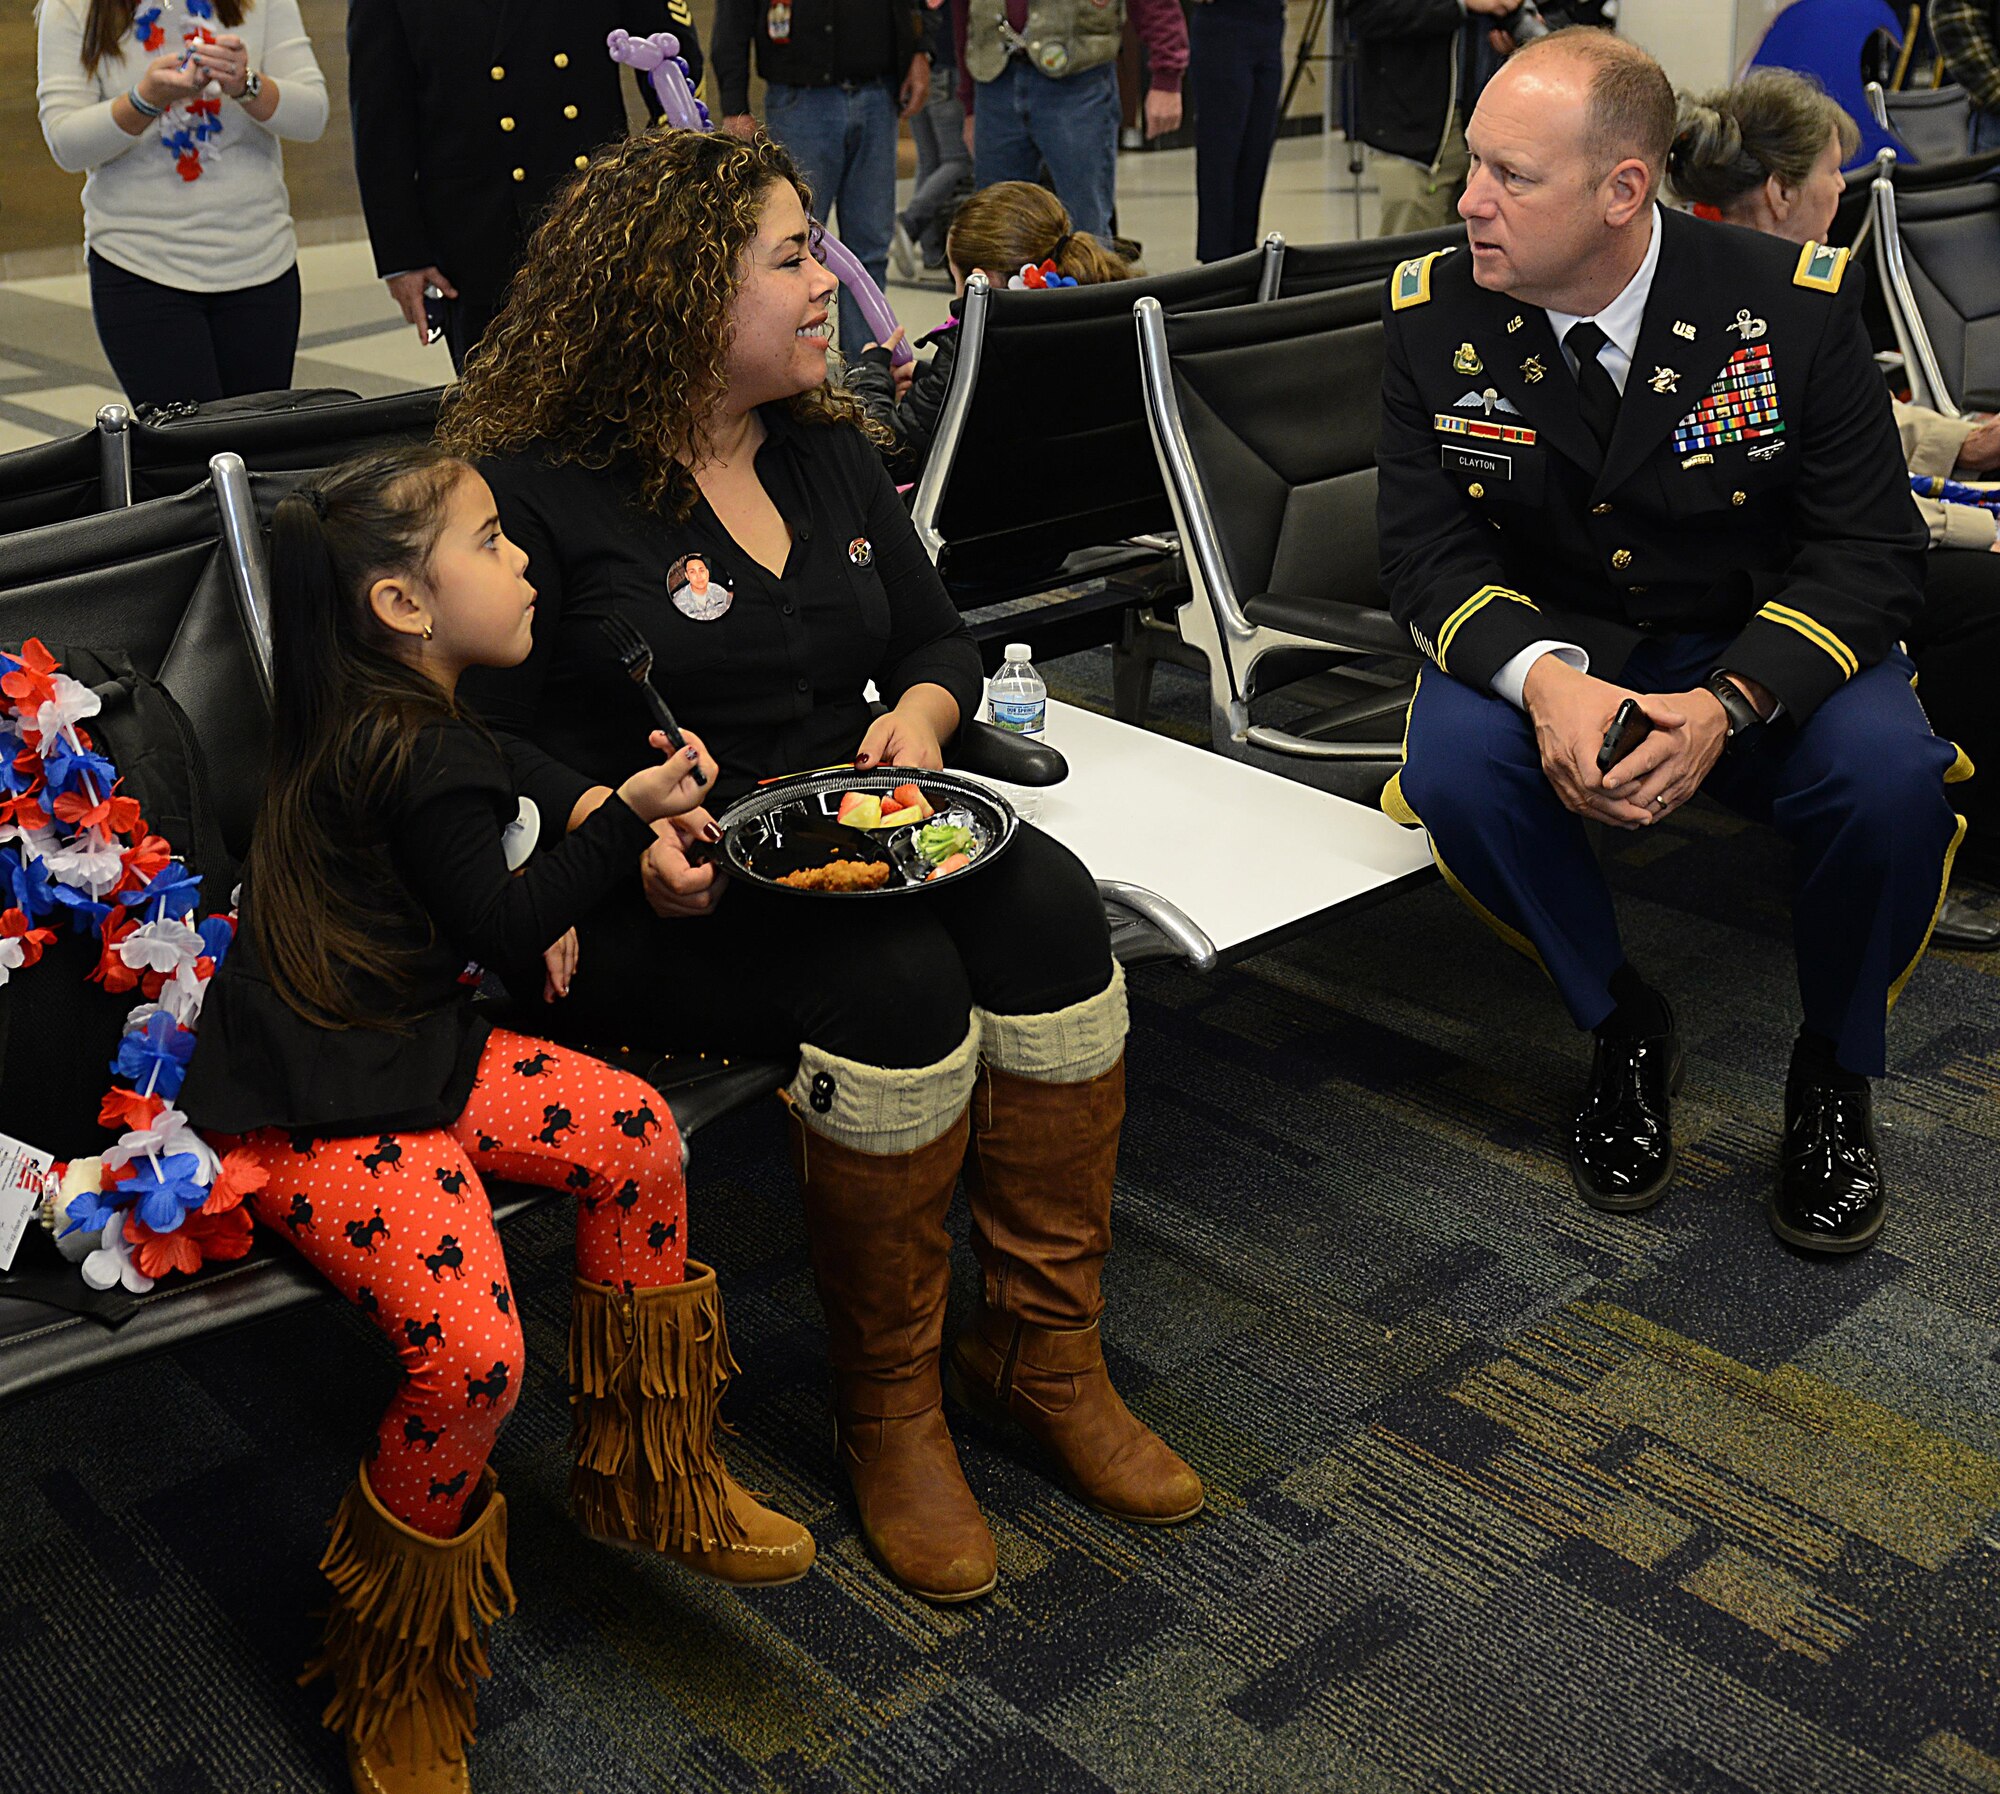 Adriana Quintana, age 5, and her mother Nilda Quintana, Gold Star family members from Hampton Roads, Va., speak with U.S. Army Col. Ralph Clayton III, 733rd Mission Support Group commander, during the Snowball Express at Norfolk International Airport, Va., Dec. 11, 2016. Nilda’s husband, Daniel Quintana, passed away while on active duty in 2011, just three months before Adriana was born. (U.S. Air Force photo by Staff Sgt. Teresa J. Cleveland)